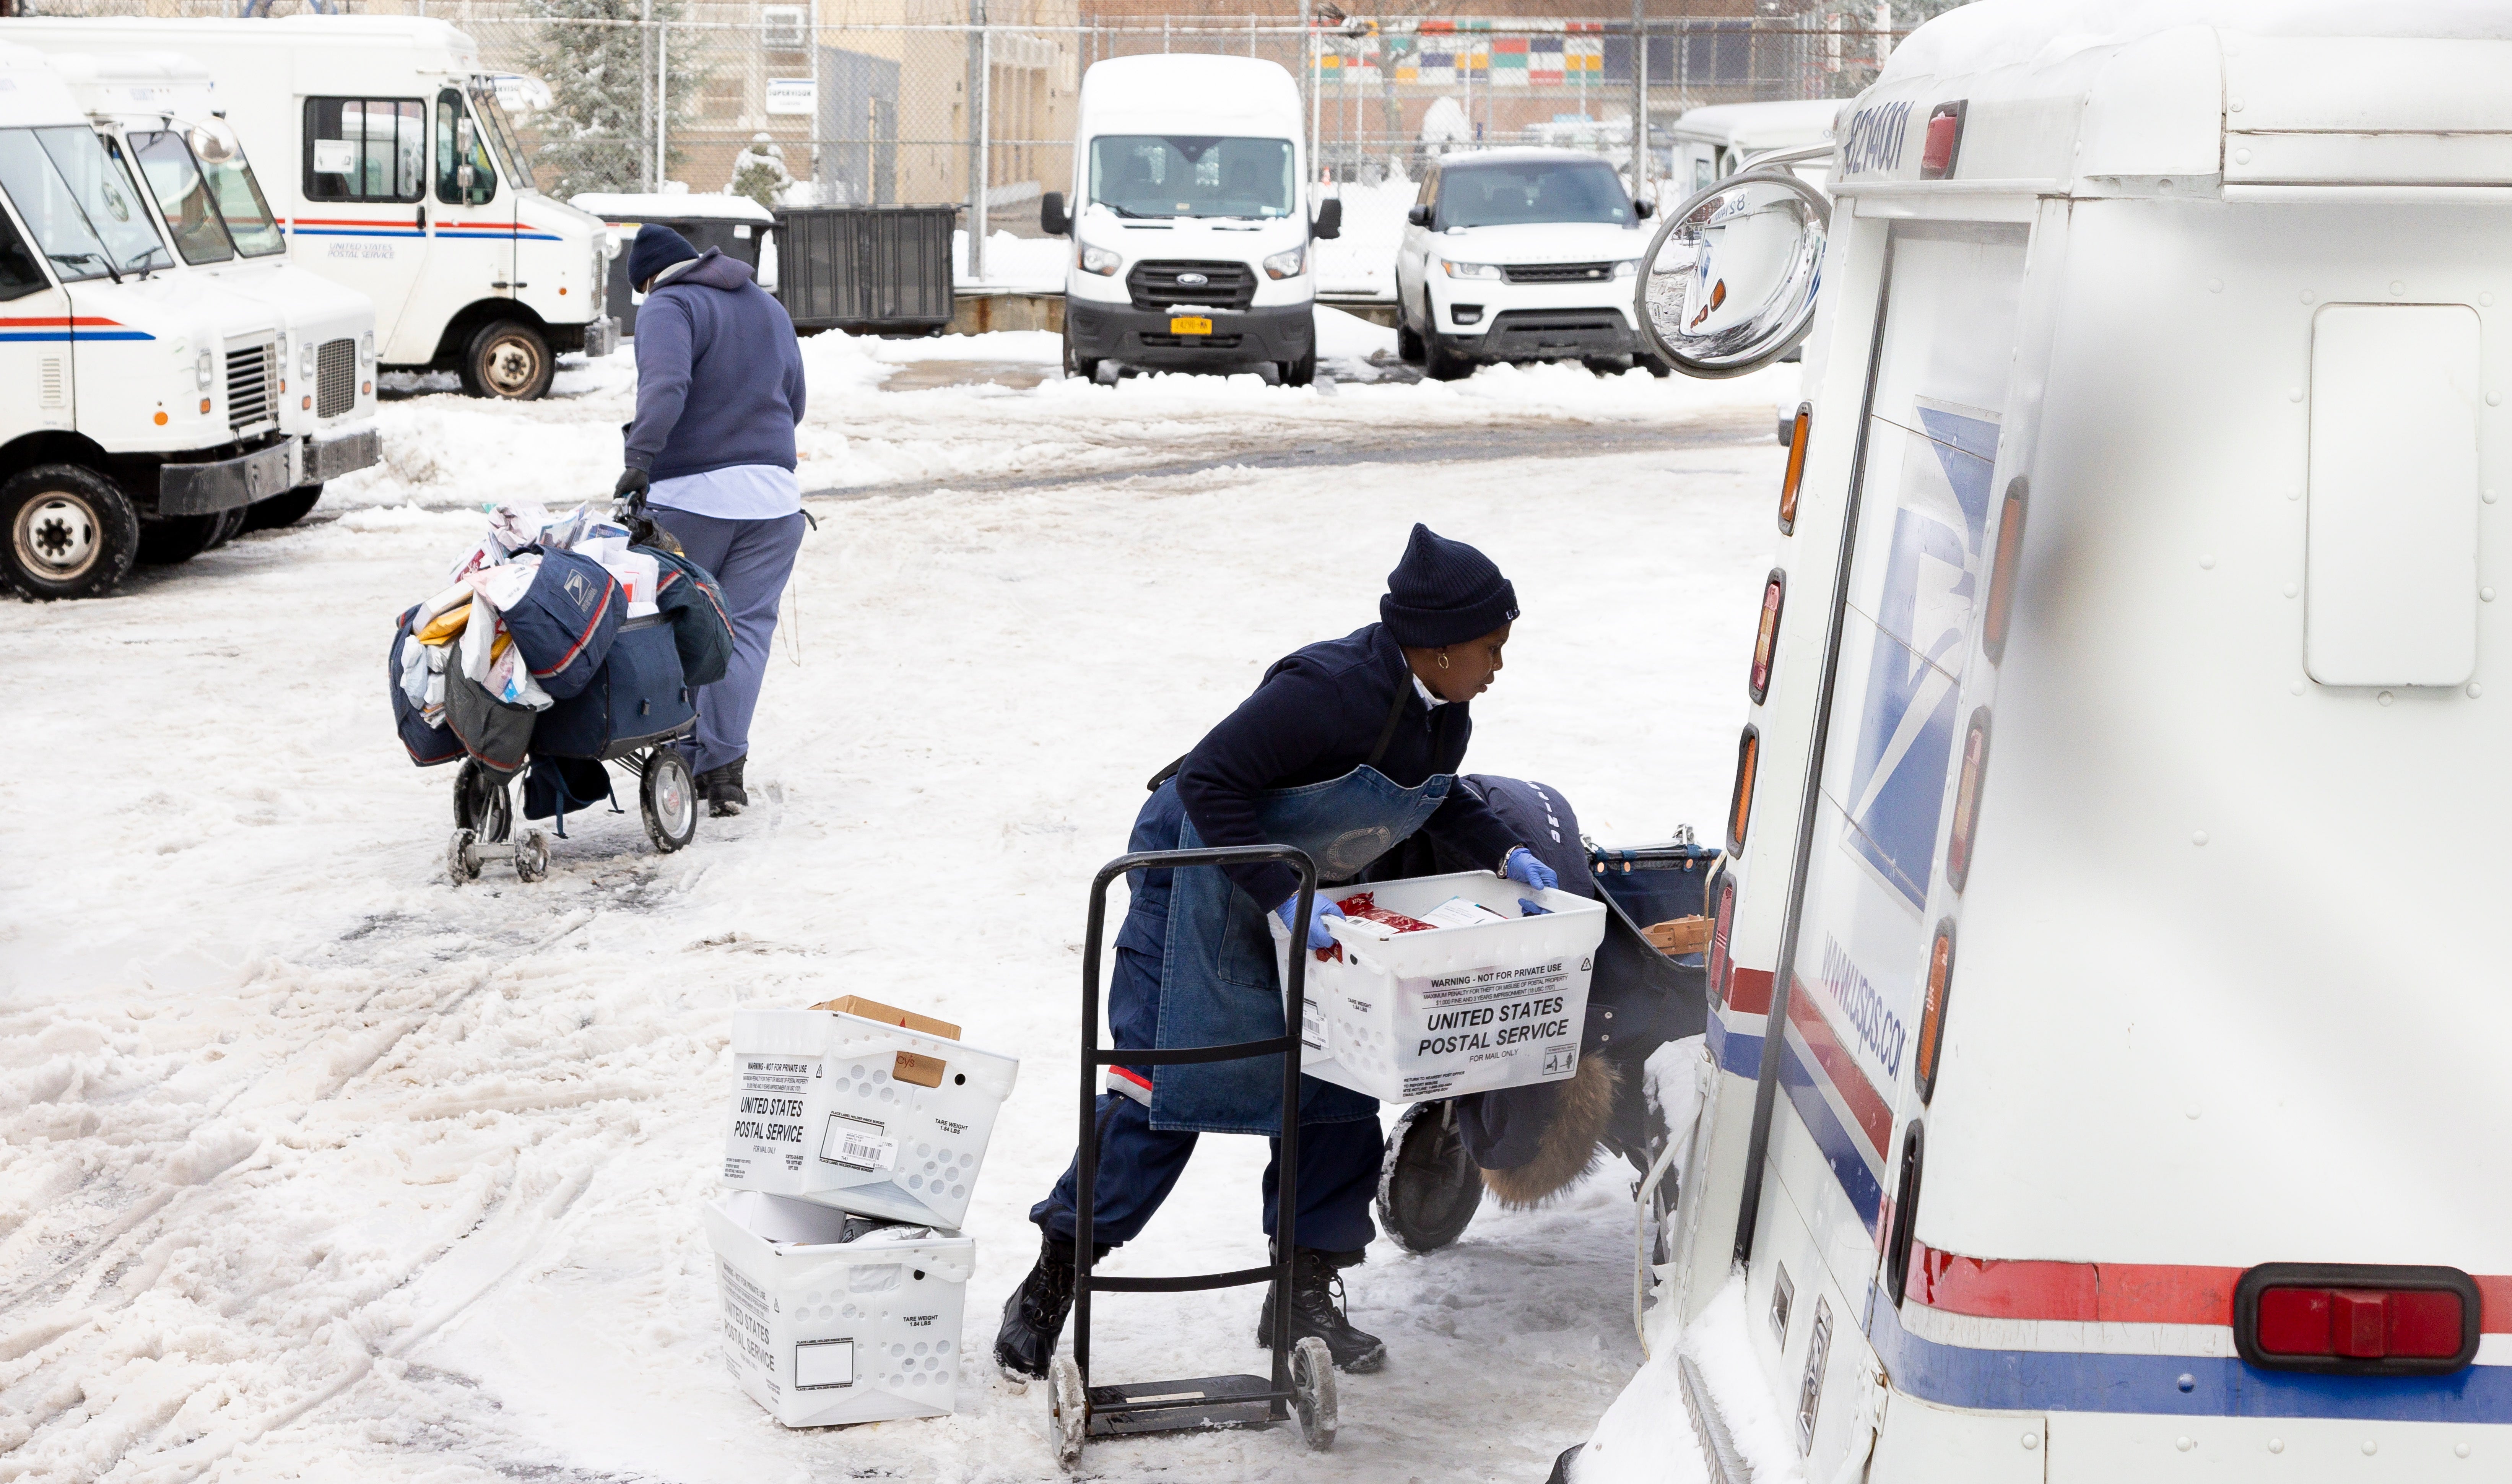 A century-old tradition from the US Postal Service connects letters to Santa Claus with volunteers to help fulfill their Christmas wishes, during a pandemic that has upended the lives of millions of American families.